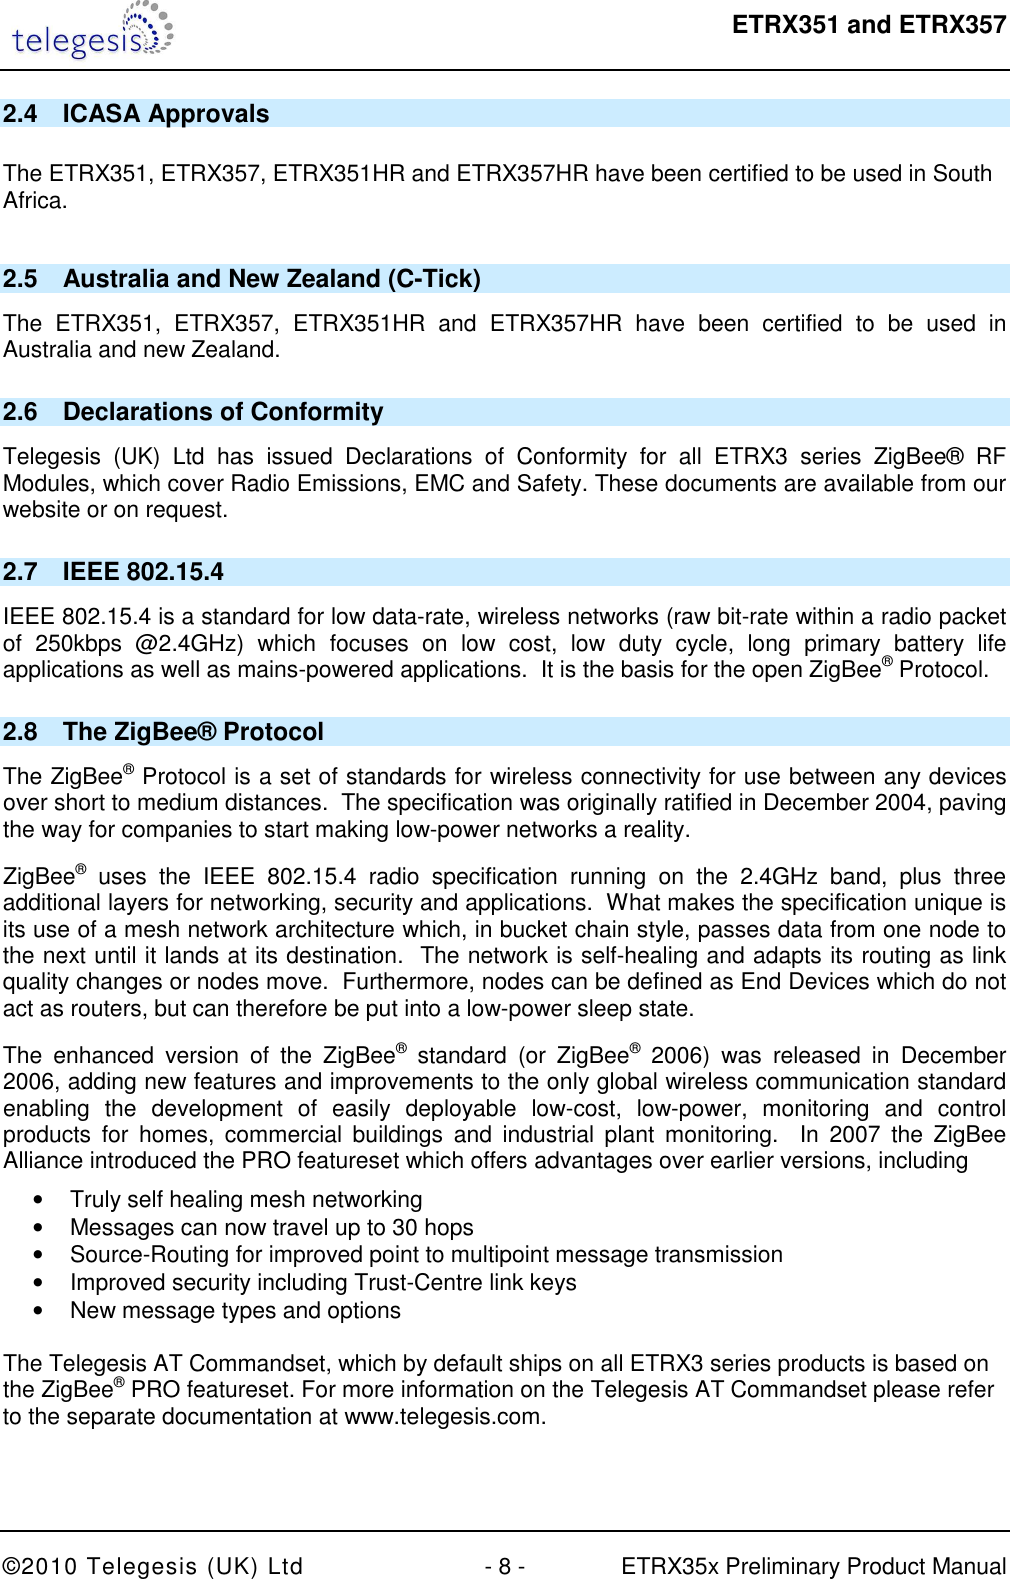  ETRX351 and ETRX357  ©2010 Telegesis (UK) Ltd  - 8 -  ETRX35x Preliminary Product Manual 2.4  ICASA Approvals  The ETRX351, ETRX357, ETRX351HR and ETRX357HR have been certified to be used in South Africa.  2.5  Australia and New Zealand (C-Tick) The  ETRX351,  ETRX357,  ETRX351HR  and  ETRX357HR  have  been  certified  to  be  used  in Australia and new Zealand. 2.6  Declarations of Conformity Telegesis  (UK)  Ltd  has  issued  Declarations  of  Conformity  for  all  ETRX3  series  ZigBee®  RF Modules, which cover Radio Emissions, EMC and Safety. These documents are available from our website or on request.   2.7  IEEE 802.15.4 IEEE 802.15.4 is a standard for low data-rate, wireless networks (raw bit-rate within a radio packet of  250kbps  @2.4GHz)  which  focuses  on  low  cost,  low  duty  cycle,  long  primary  battery  life applications as well as mains-powered applications.  It is the basis for the open ZigBee® Protocol. 2.8  The ZigBee® Protocol The ZigBee® Protocol is a set of standards for wireless connectivity for use between any devices over short to medium distances.  The specification was originally ratified in December 2004, paving the way for companies to start making low-power networks a reality. ZigBee®  uses  the  IEEE  802.15.4  radio  specification  running  on  the  2.4GHz  band,  plus  three additional layers for networking, security and applications.  What makes the specification unique is its use of a mesh network architecture which, in bucket chain style, passes data from one node to the next until it lands at its destination.  The network is self-healing and adapts its routing as link quality changes or nodes move.  Furthermore, nodes can be defined as End Devices which do not act as routers, but can therefore be put into a low-power sleep state. The  enhanced  version  of  the  ZigBee®  standard  (or  ZigBee®  2006)  was  released  in  December 2006, adding new features and improvements to the only global wireless communication standard enabling  the  development  of  easily  deployable  low-cost,  low-power,  monitoring  and  control products  for  homes,  commercial  buildings  and  industrial  plant  monitoring.    In  2007  the  ZigBee Alliance introduced the PRO featureset which offers advantages over earlier versions, including •  Truly self healing mesh networking •  Messages can now travel up to 30 hops •  Source-Routing for improved point to multipoint message transmission •  Improved security including Trust-Centre link keys •  New message types and options  The Telegesis AT Commandset, which by default ships on all ETRX3 series products is based on the ZigBee® PRO featureset. For more information on the Telegesis AT Commandset please refer to the separate documentation at www.telegesis.com.  